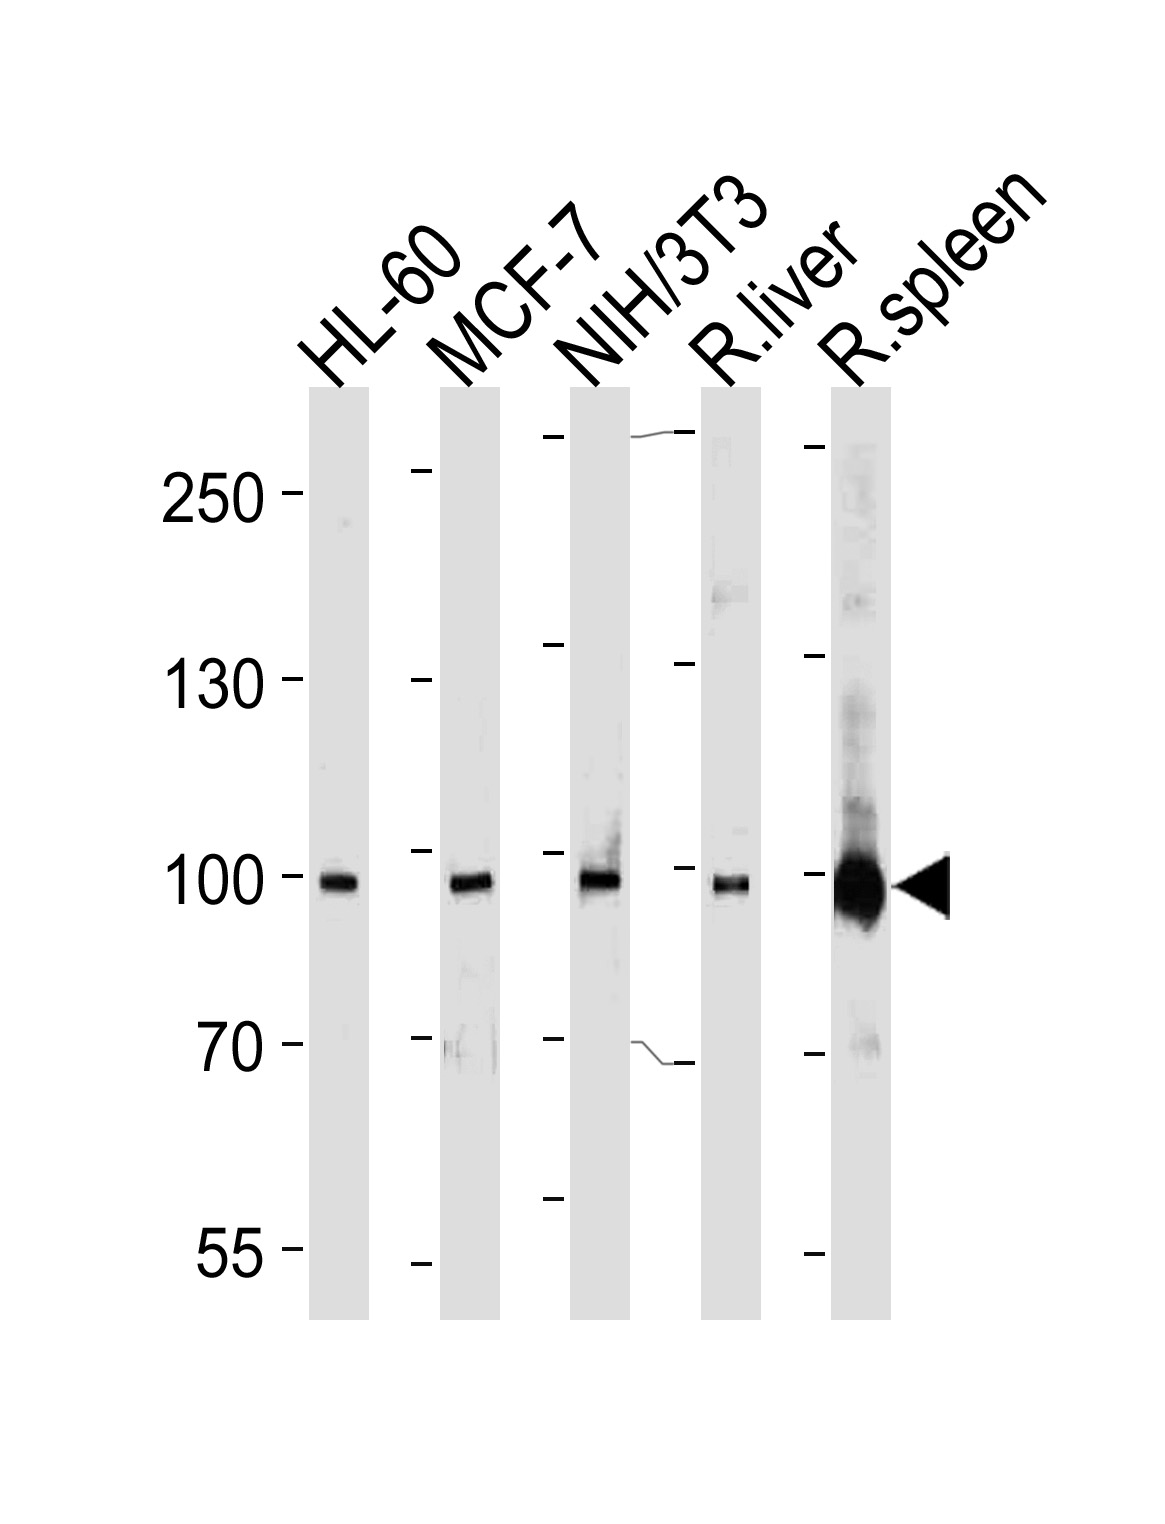 STAT5b Antibody (Cat. #AP1530a) western blot analysis in HL-60,MCF-7,mouse NIH/3T3 cell line, rat liver and spleen lysates (35ug/lane).This demonstrates the STAT5b antibody detected the STAT5b protein (arrow).